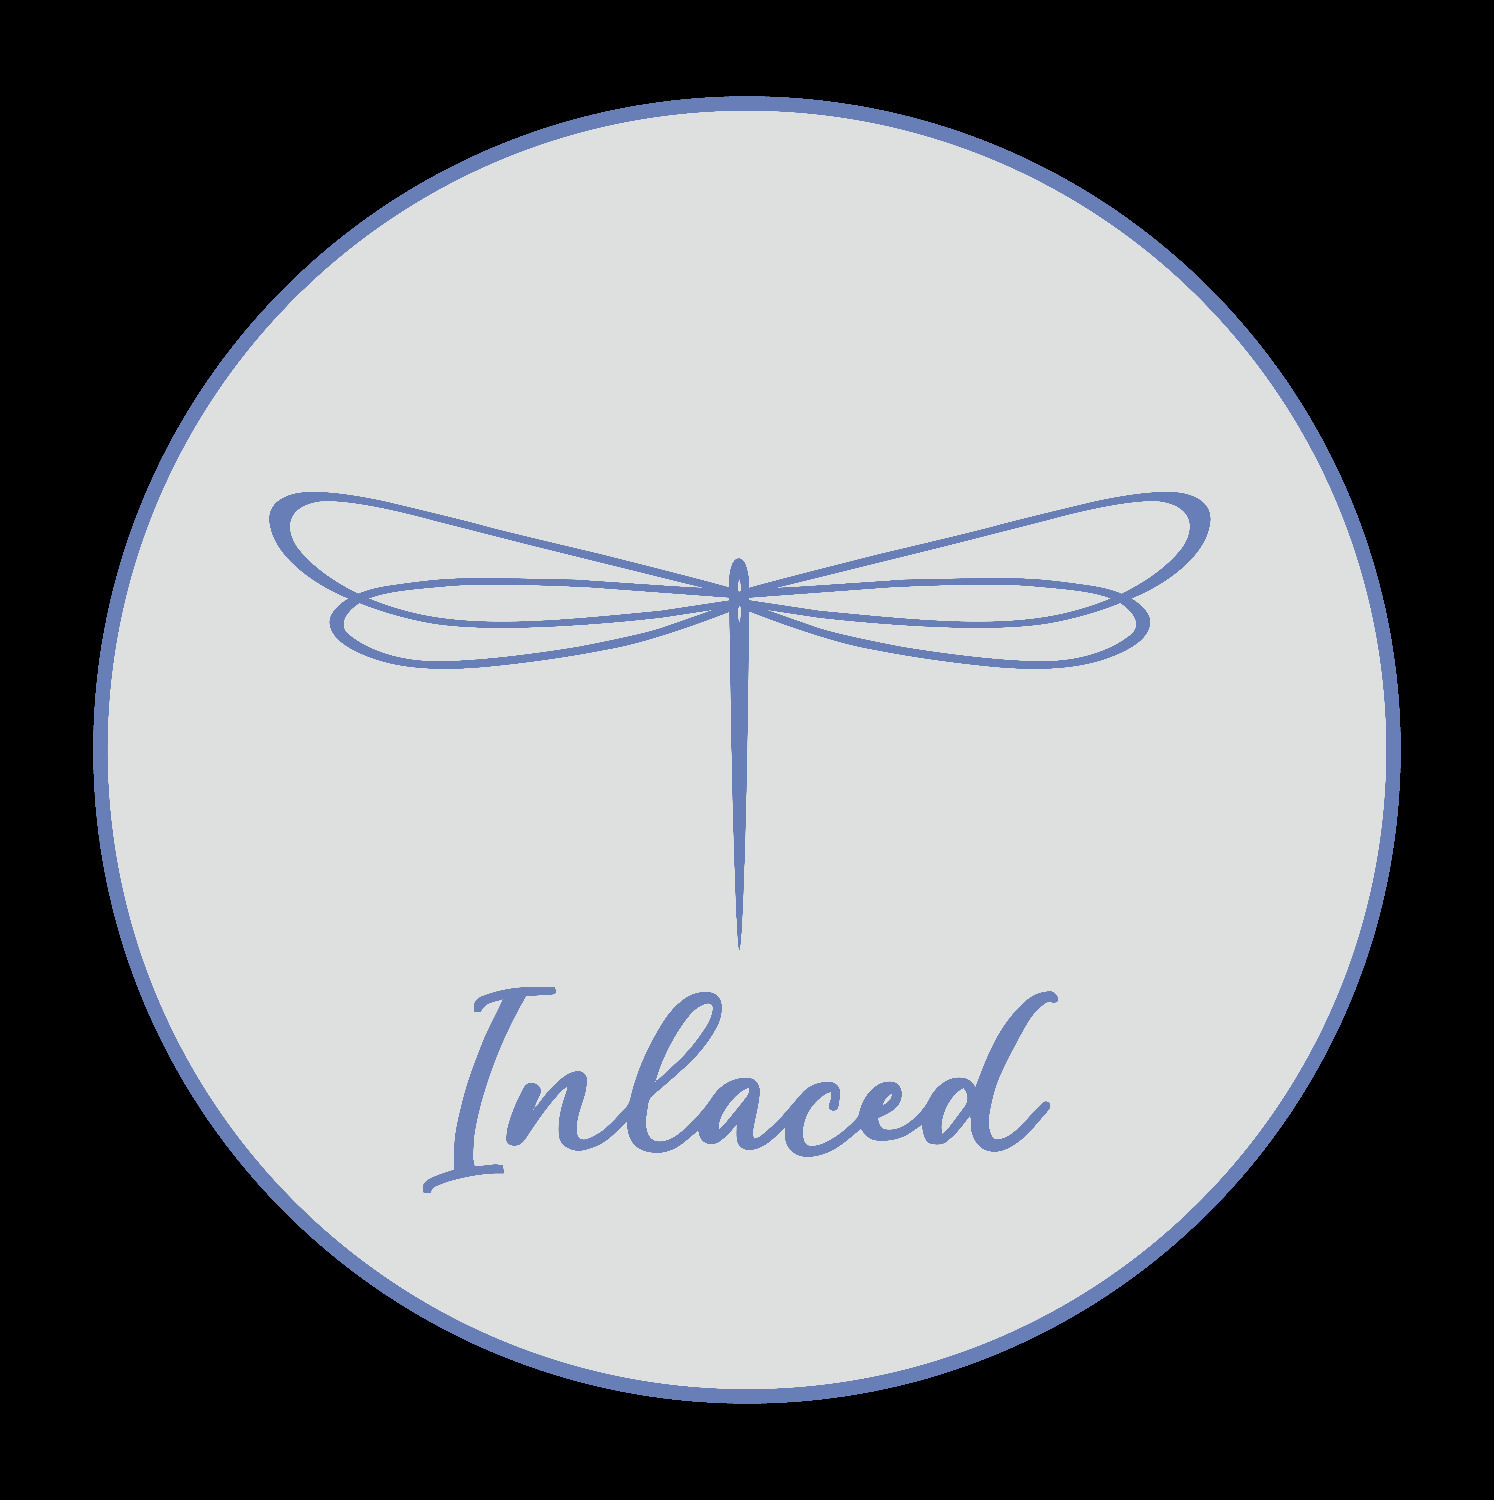 Please what font for inlaced.